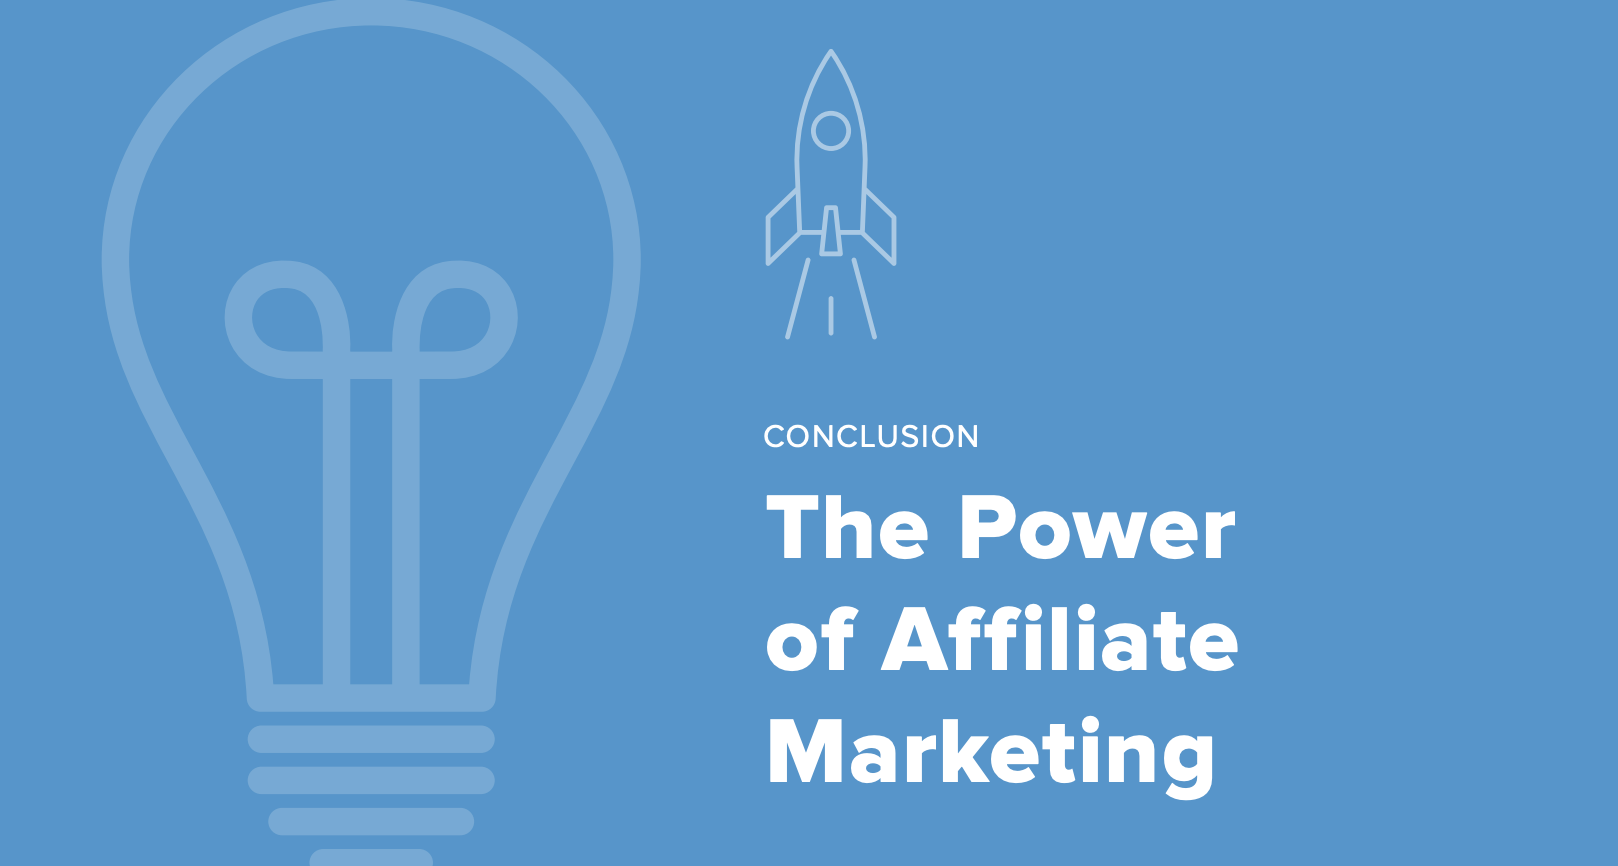 The power of affiliate marketing